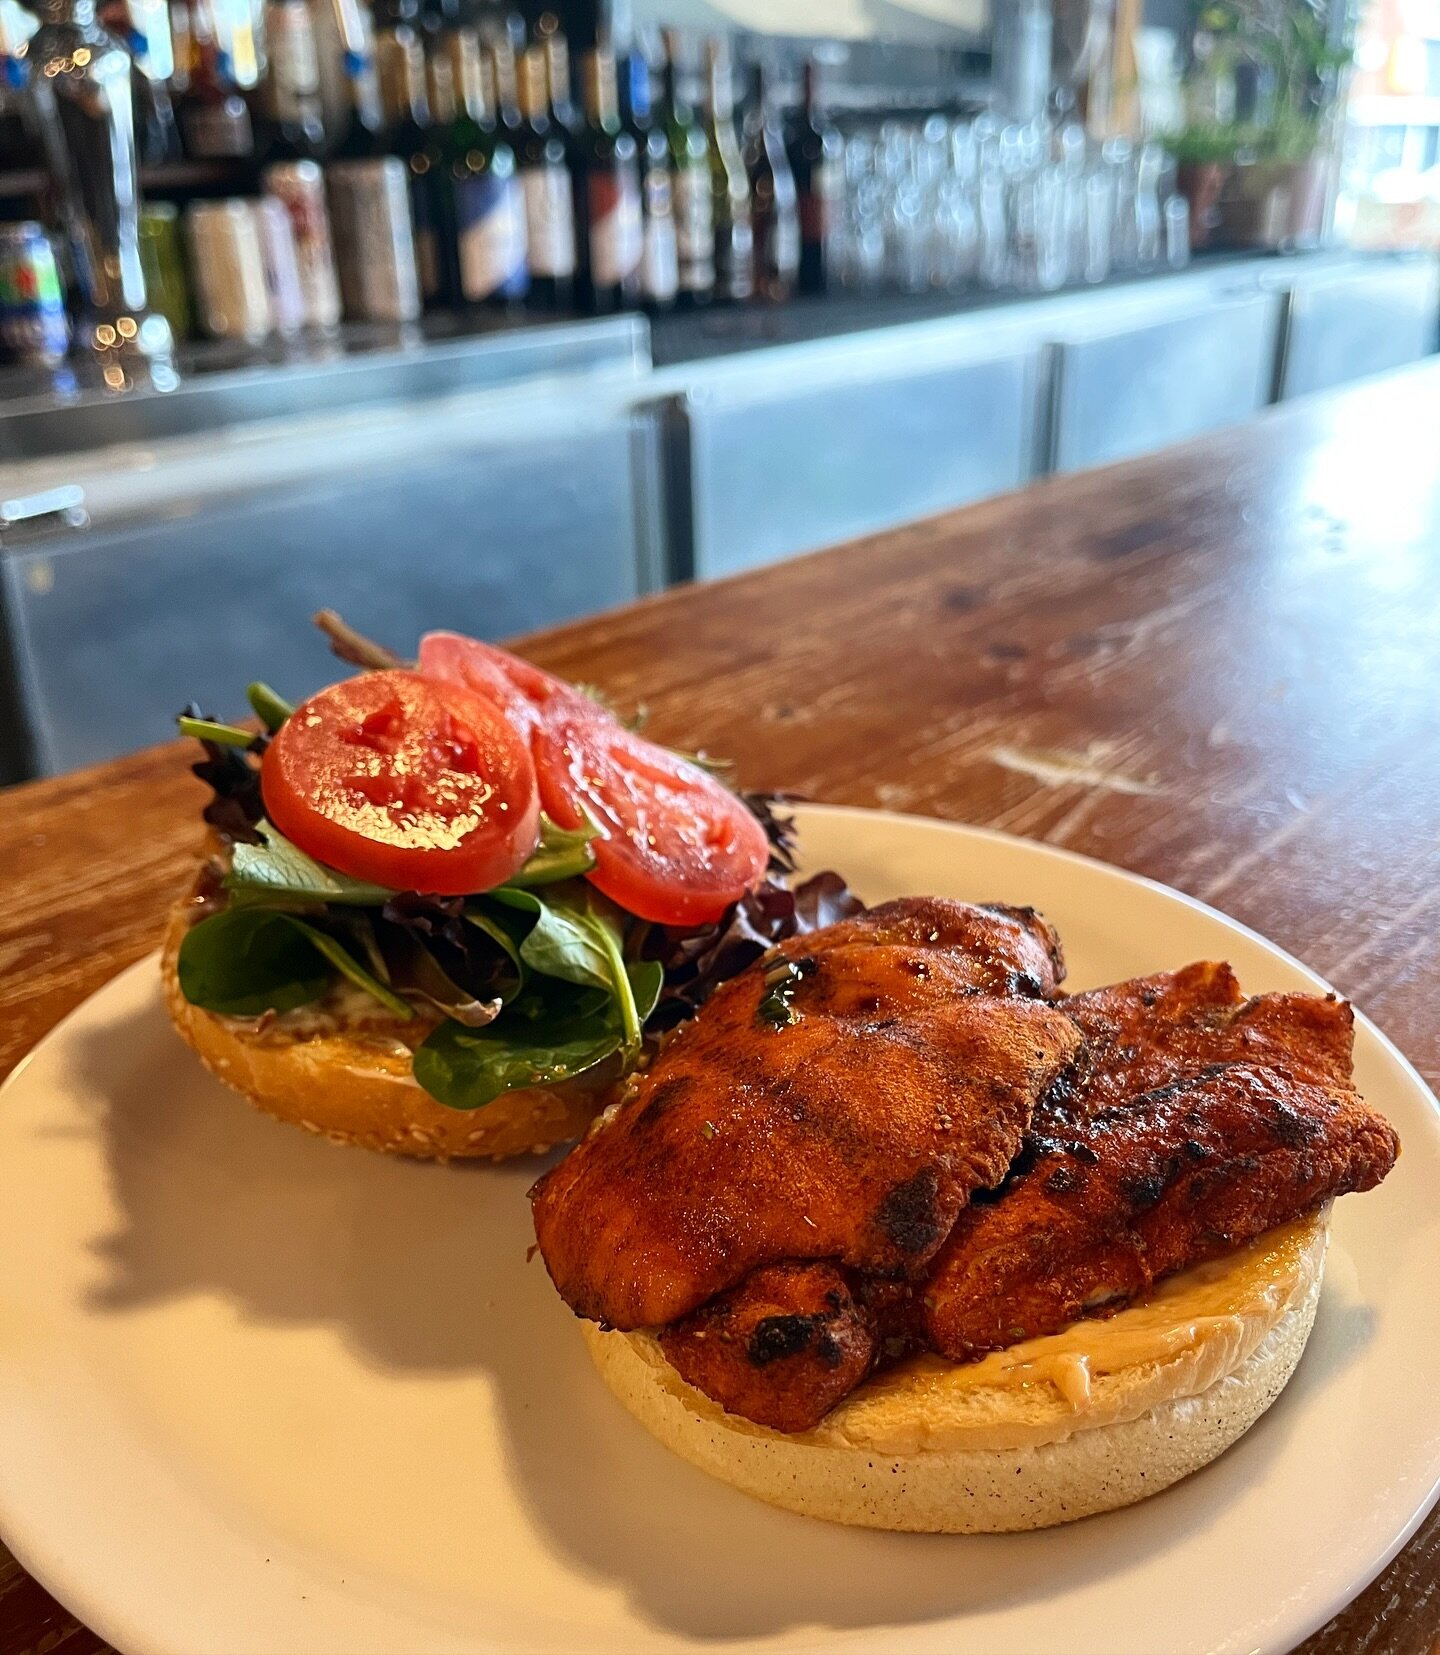 Cliff &amp; Ed&rsquo;s Blackened Chicken Burger🍔 
~ Blackened Cajun chicken breast on a sesame bun, served with your choice of side! ~ 
&bull;
&bull;
[image shows no side]